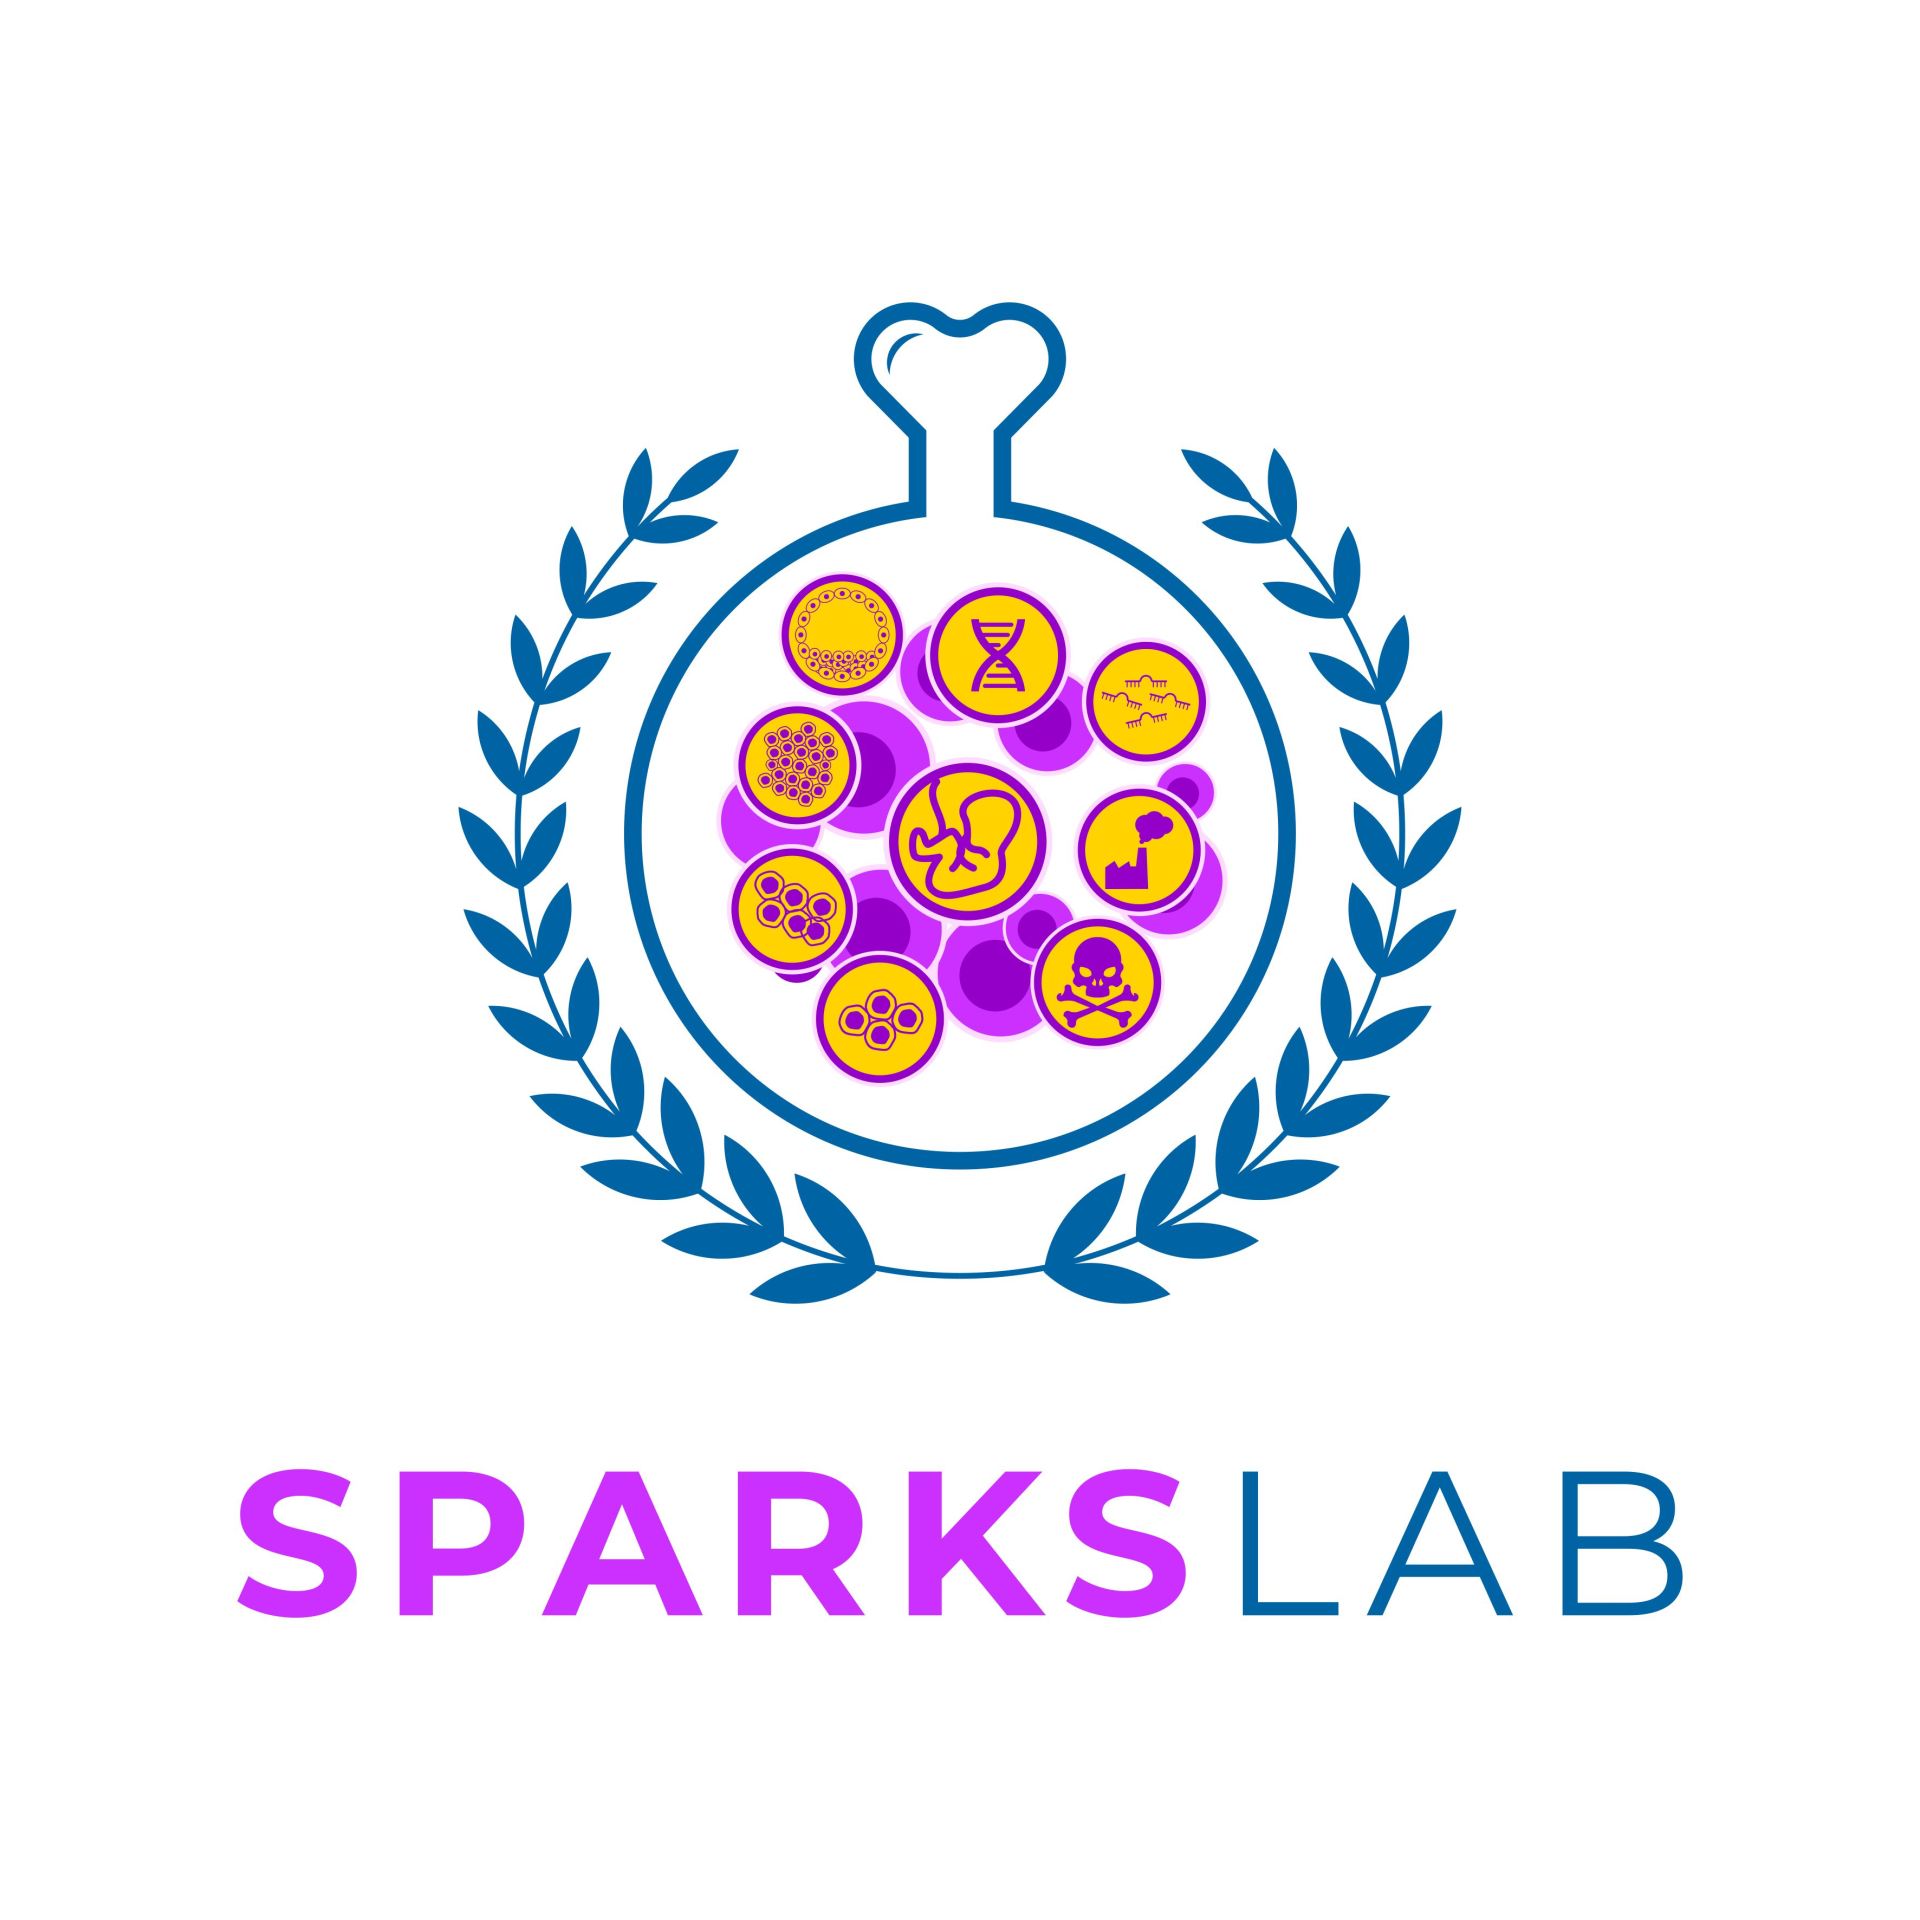 Sparks Lab logo shows yellow circles with research themes in a round bottom flask and a laurel around it